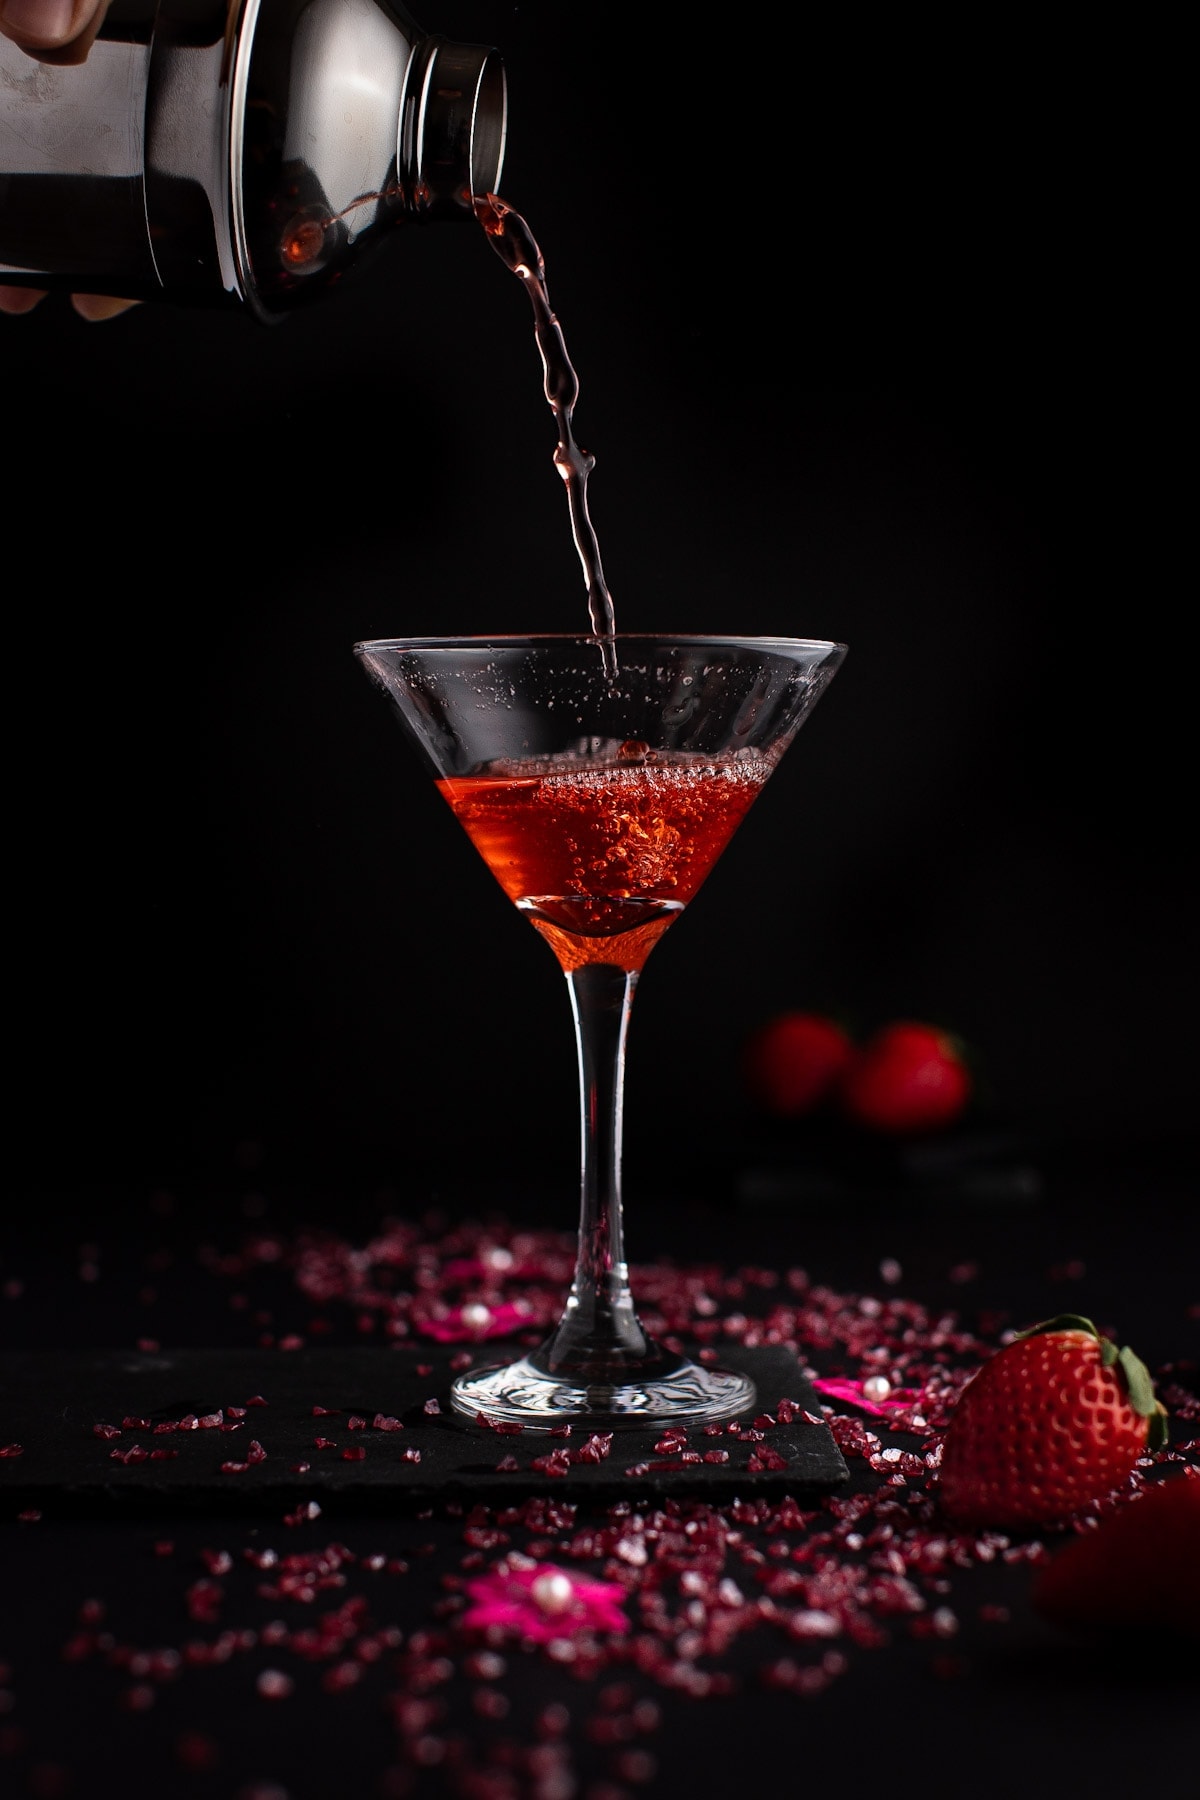 Strawberry martini being poured from a cocktail shaker into a martini glass, on a black background.